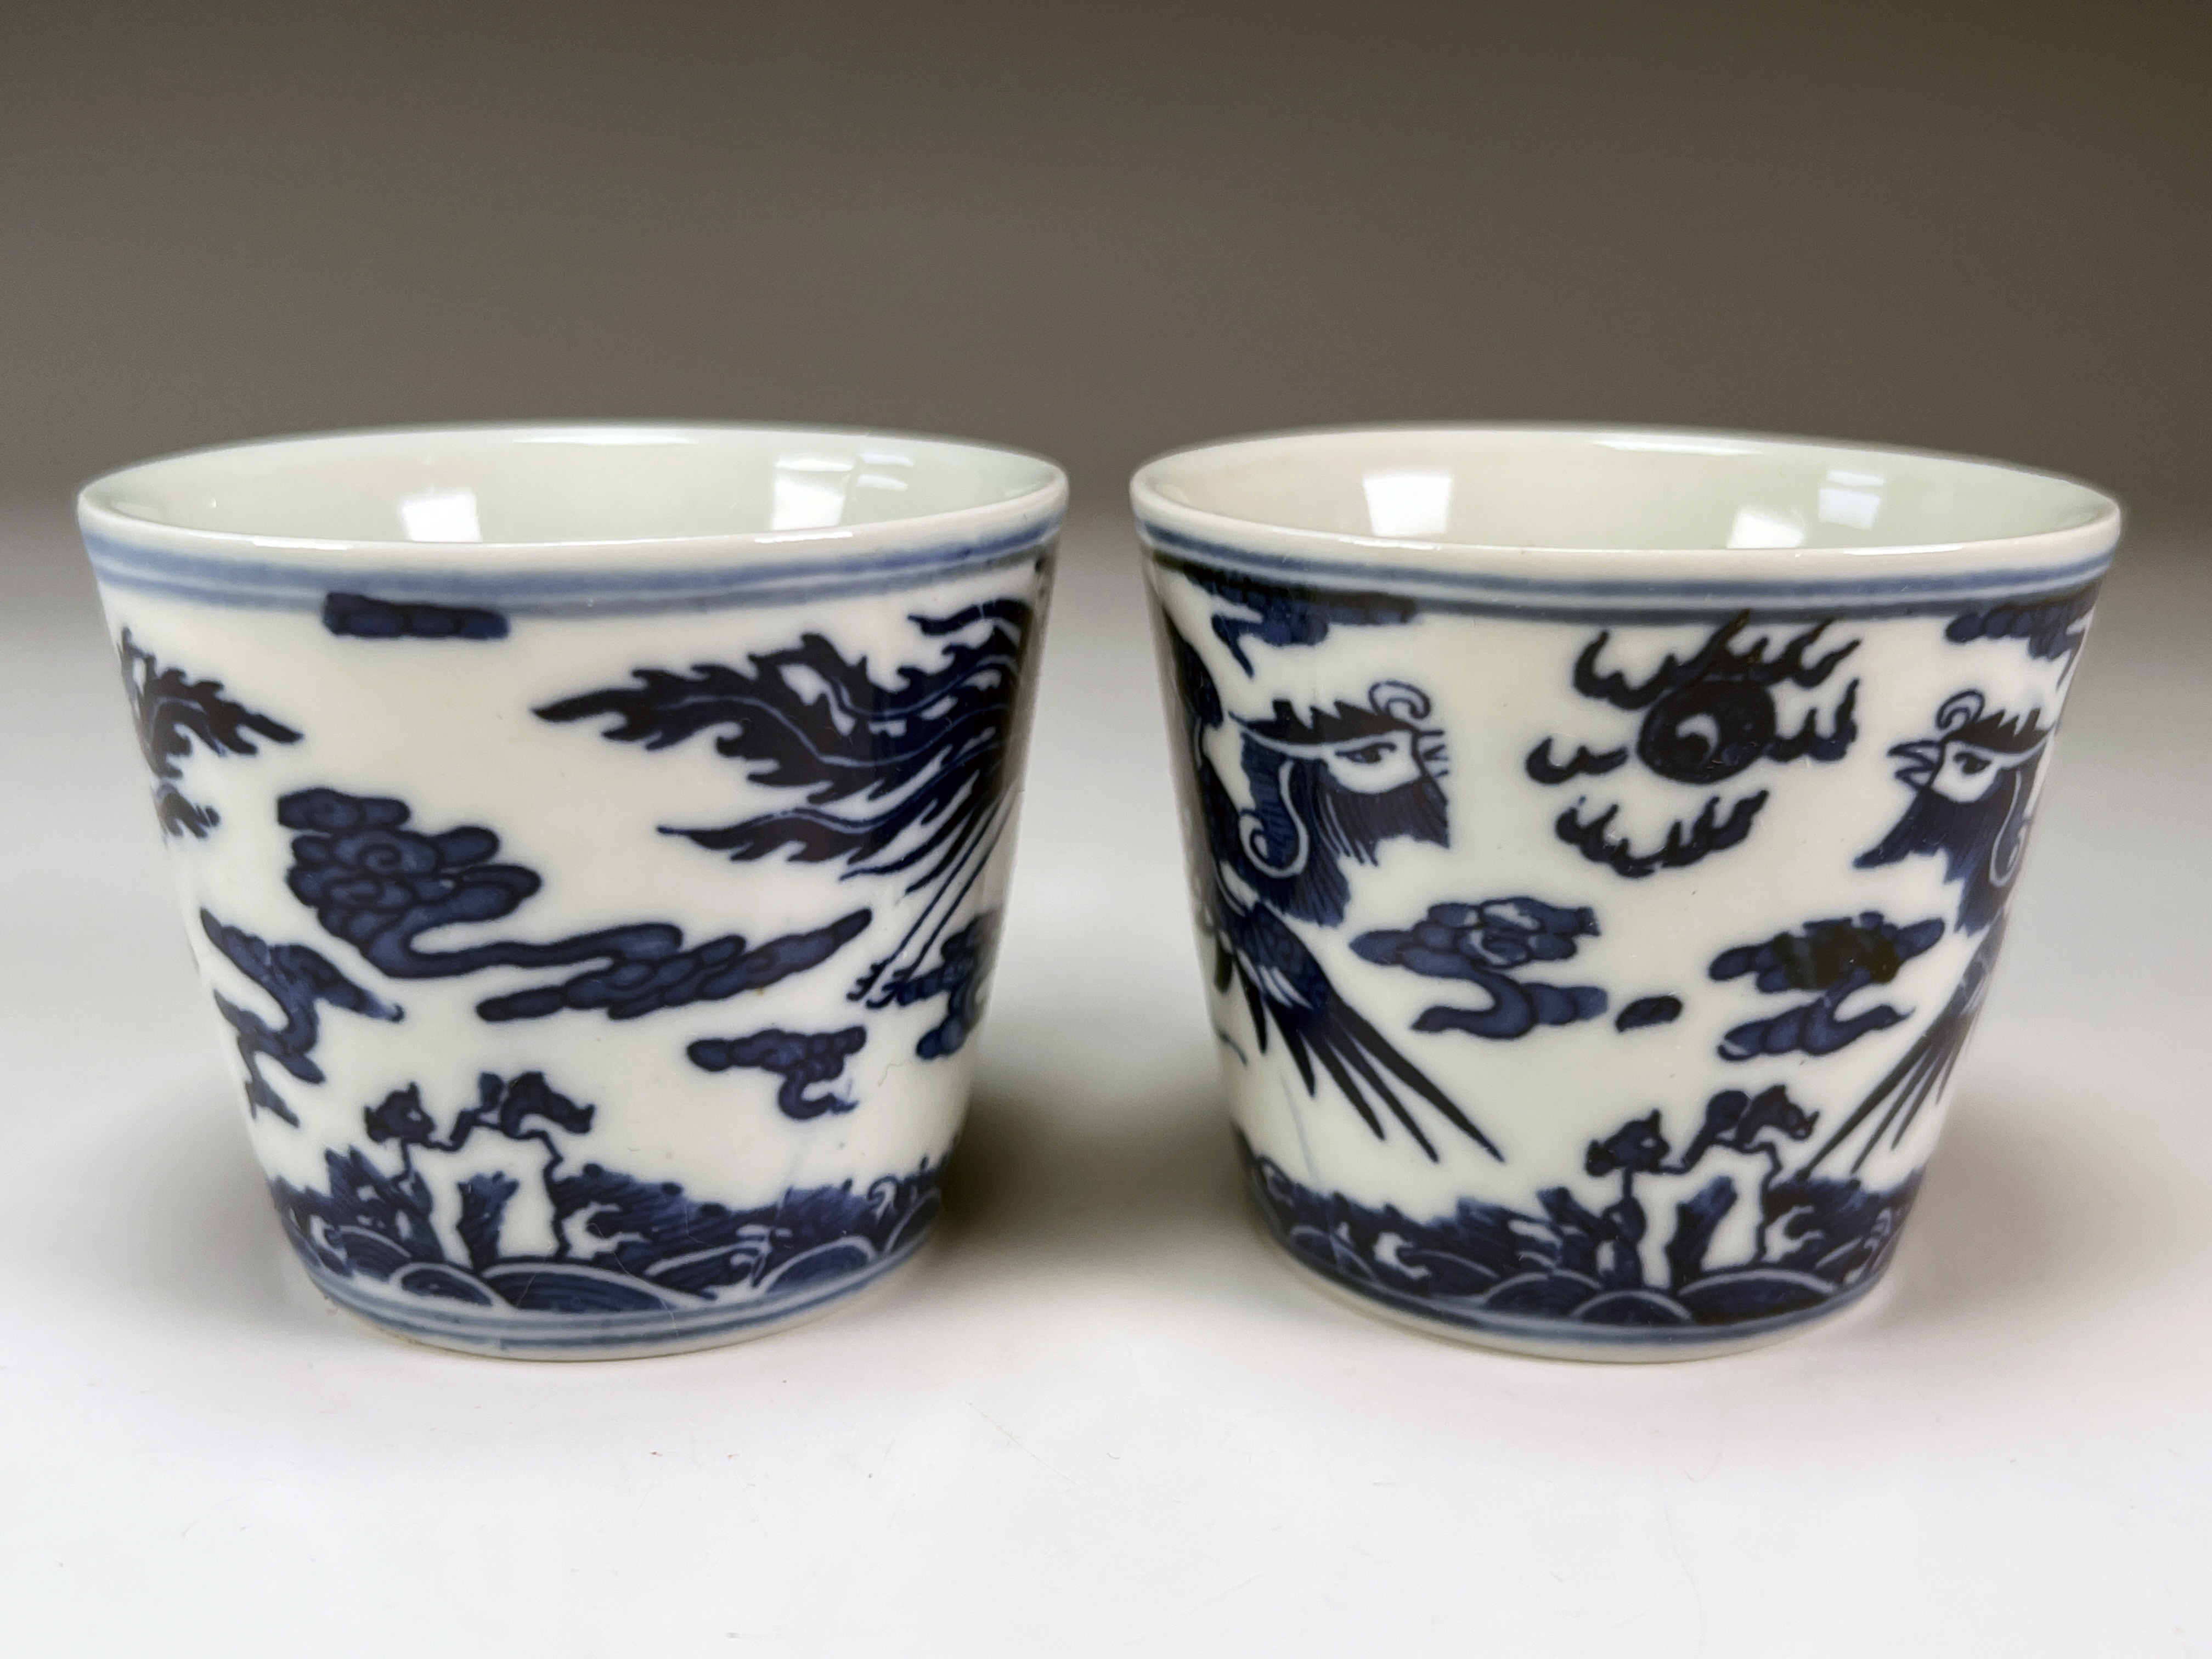 Charming Blue & White Phoenix Porcelain Tea Cups With Six Character Mark image 2